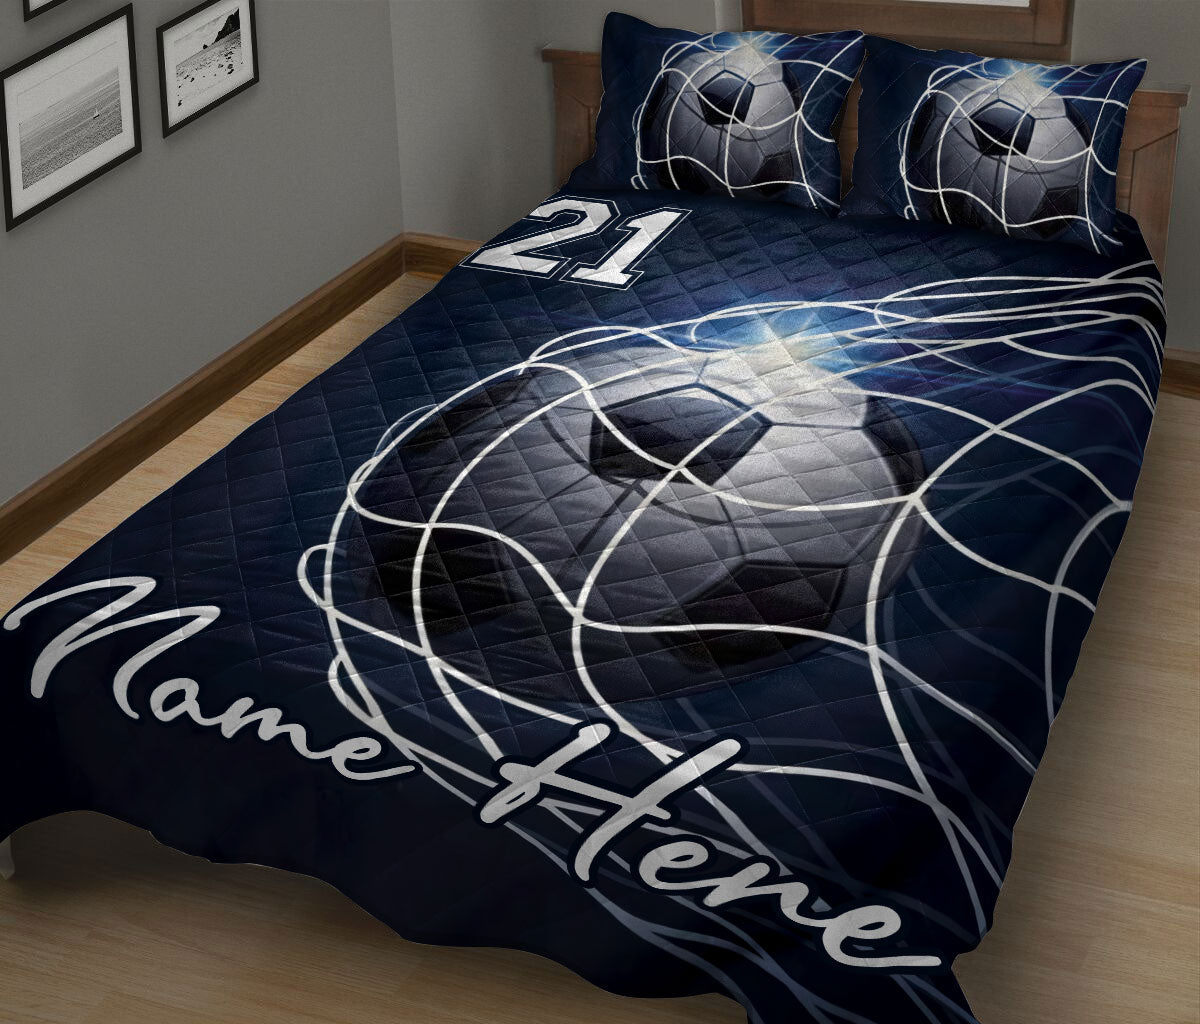 Ohaprints-Quilt-Bed-Set-Pillowcase-Soccer-Goal-Navy-Net-Sports-Lovers-Fan-Unique-Gift-Custom-Personalized-Name-Blanket-Bedspread-Bedding-651-King (90'' x 100'')